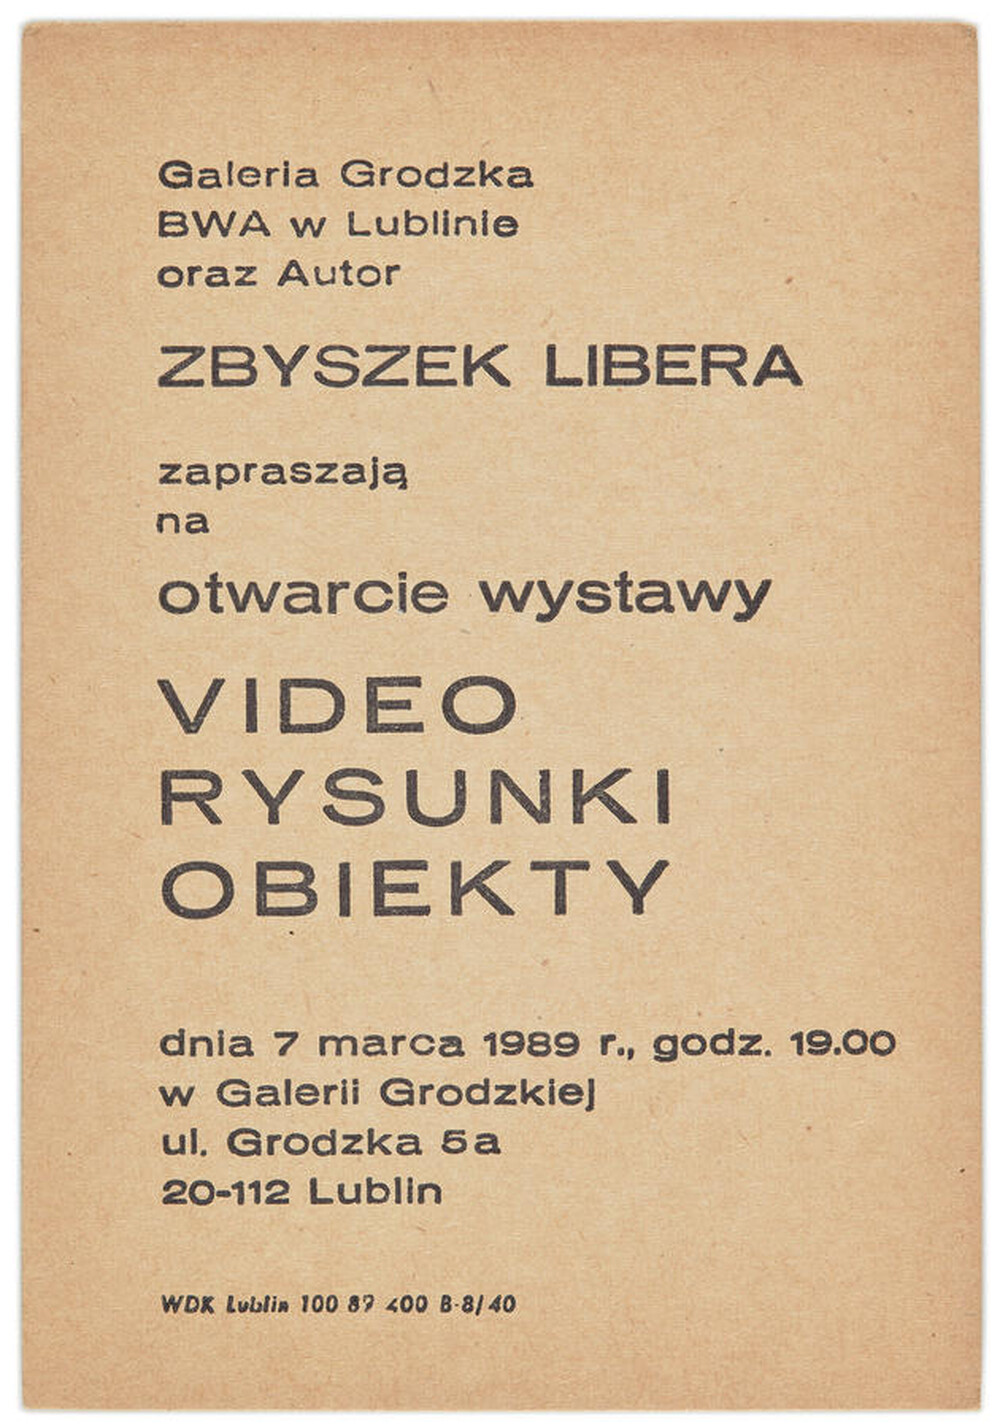 Invitation to the opening of an exhibition by Zbigniew Libera